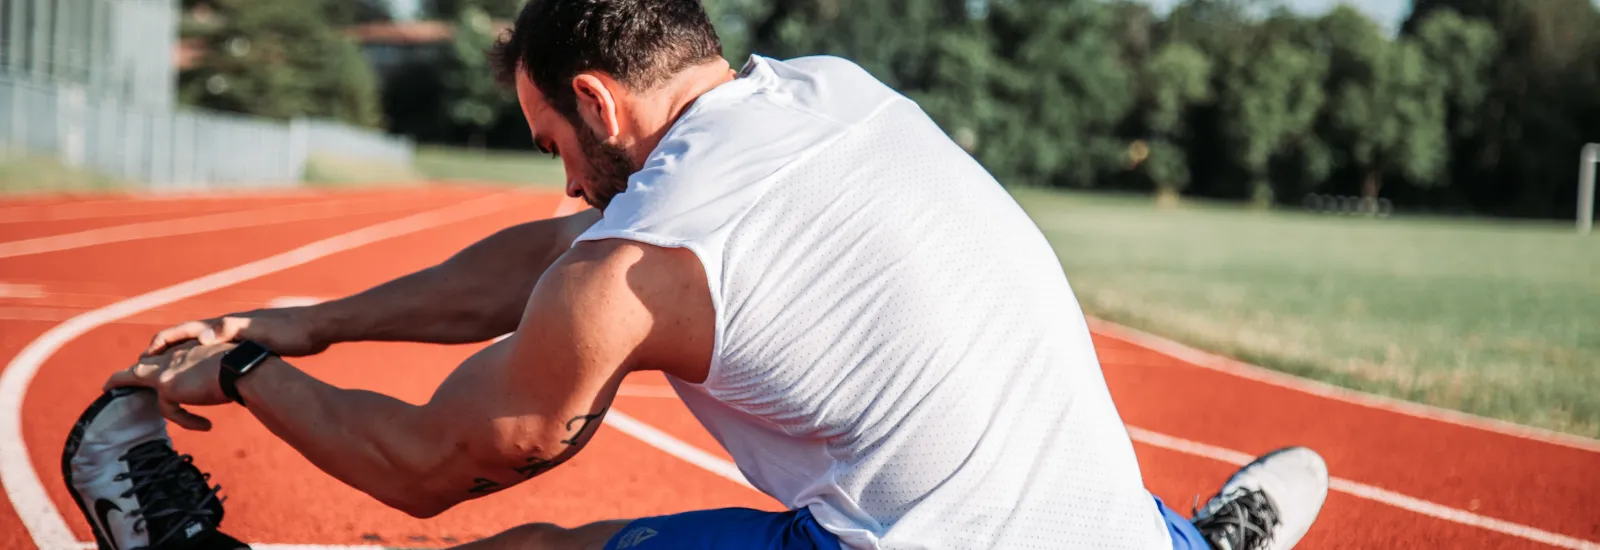 When should you see a sports medicine doctor about your pain?